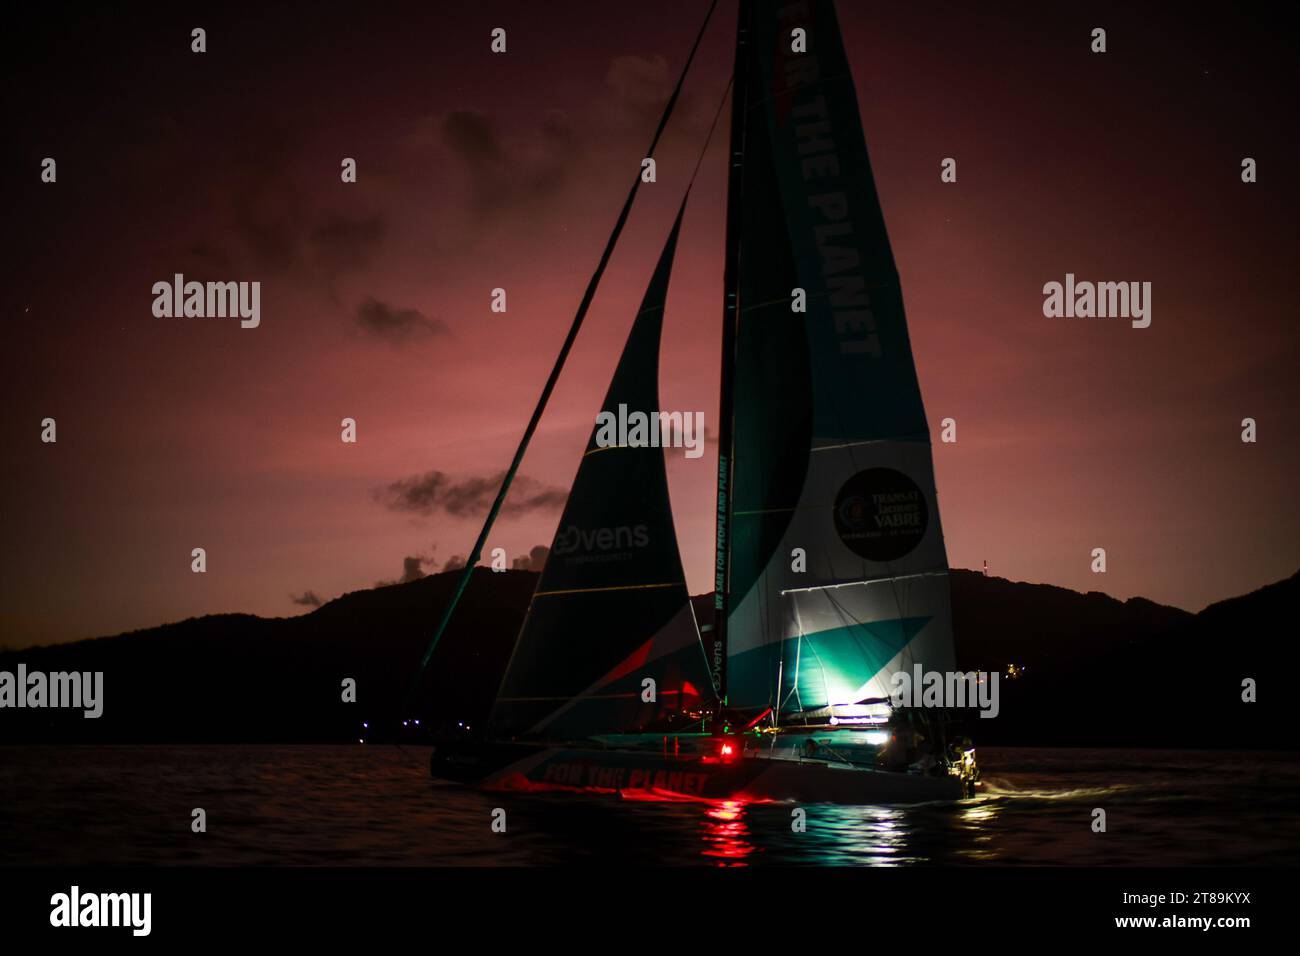 Sam Goodchild (gbr) and Antoine Koch (fra), For the Planet, first in Imoca during the arrival of the 16th edition of the Transat Jacques Vabre, yachting race at Fort de France, Martinique, on November 19th, 2023 Stock Photo